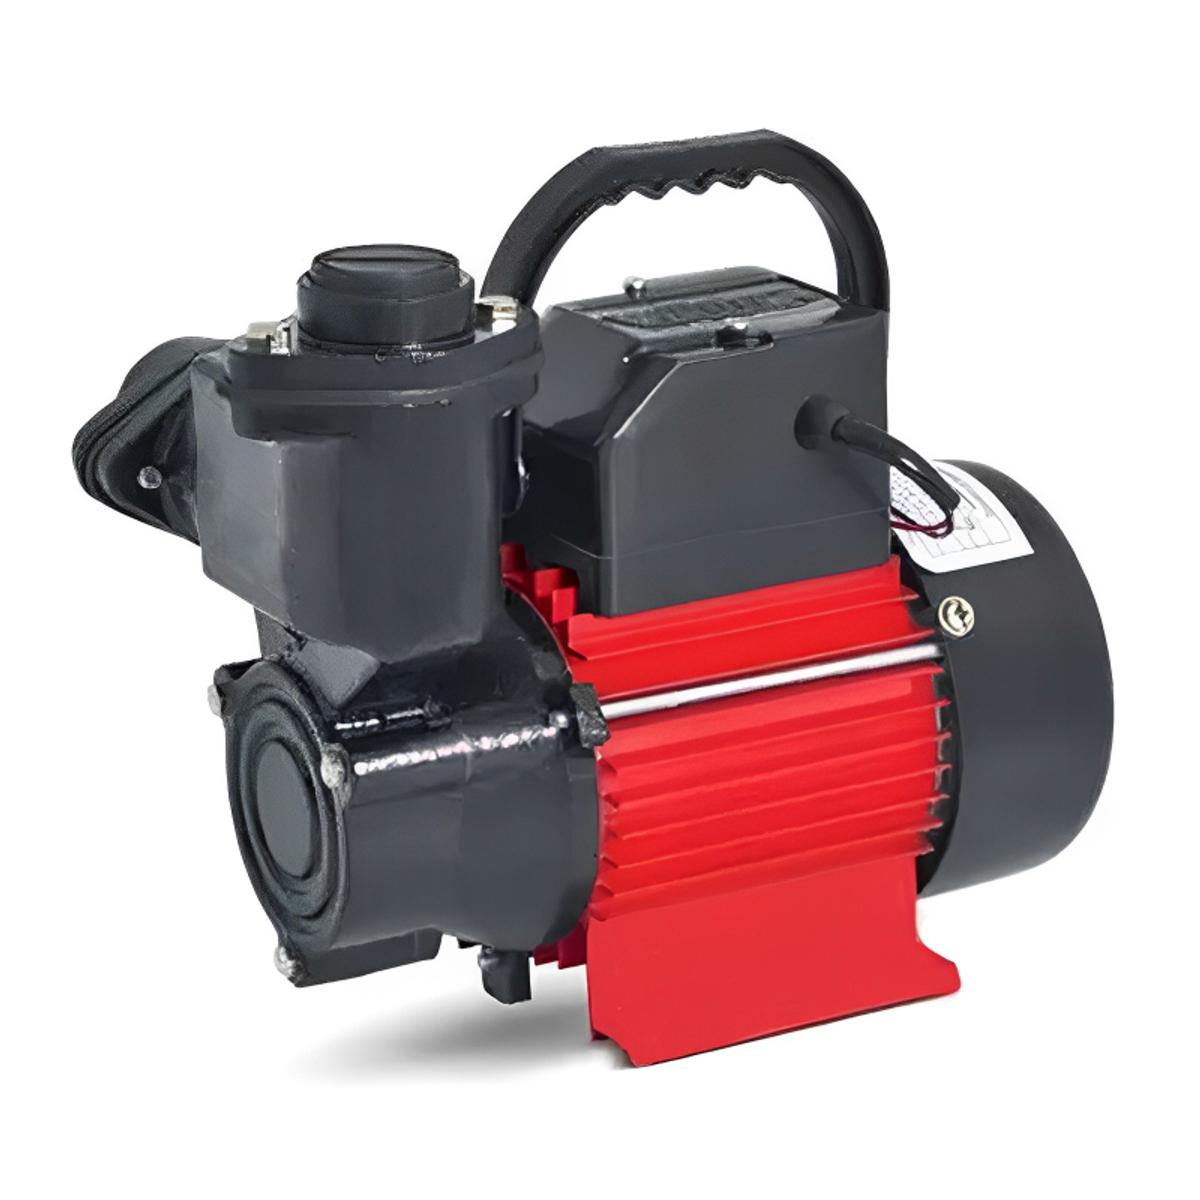 S PRO PUMPS   Keralas Leading Water Pump Manufacturer and  - Kerala - Thrissur ID1551144 4